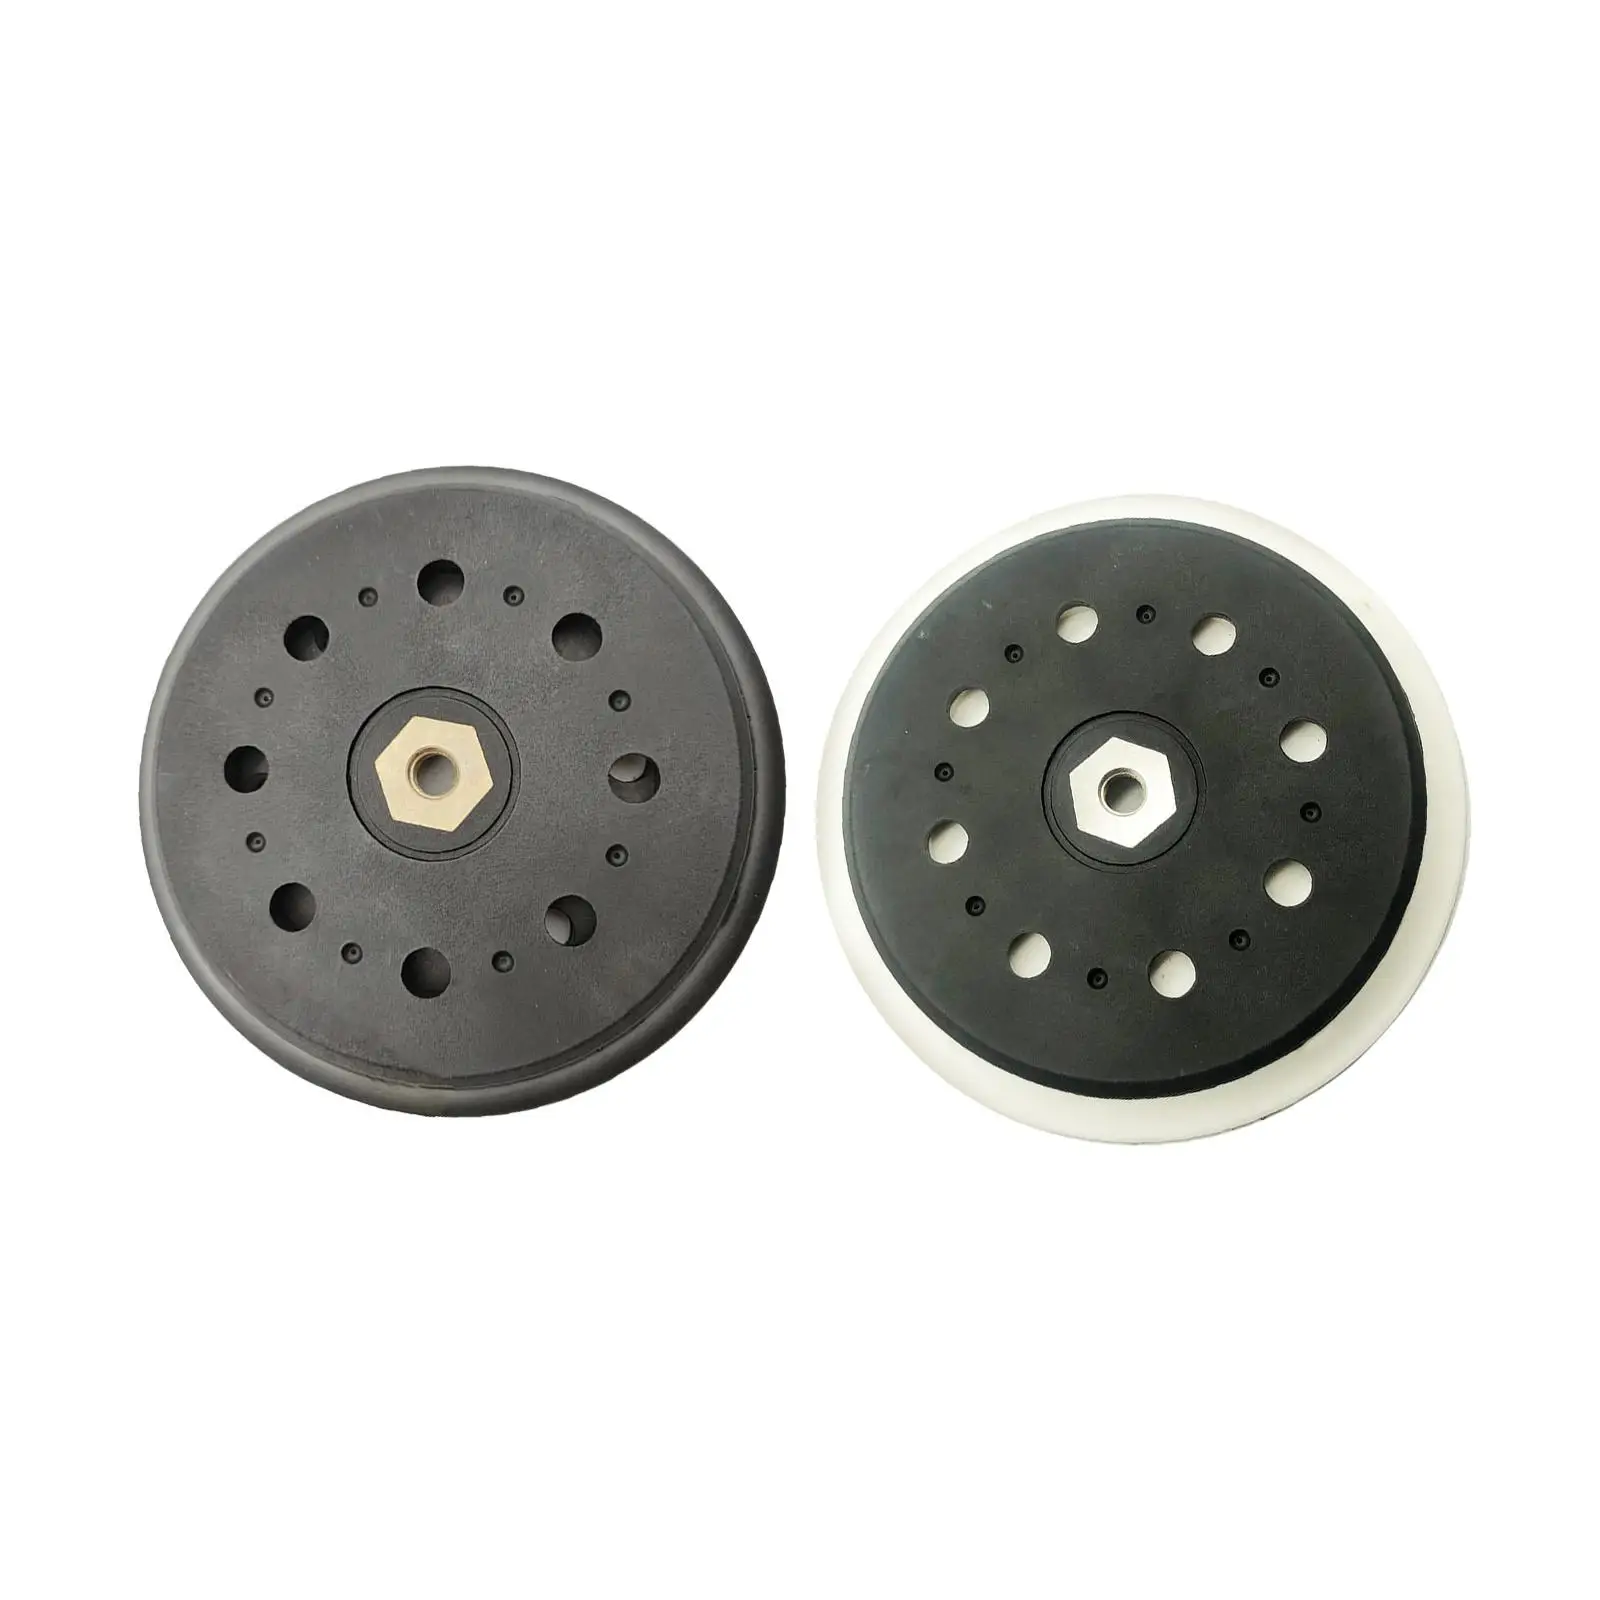 Sander Sanding Disc 148mm Durable with Mount Hole Backup Pad for Carving